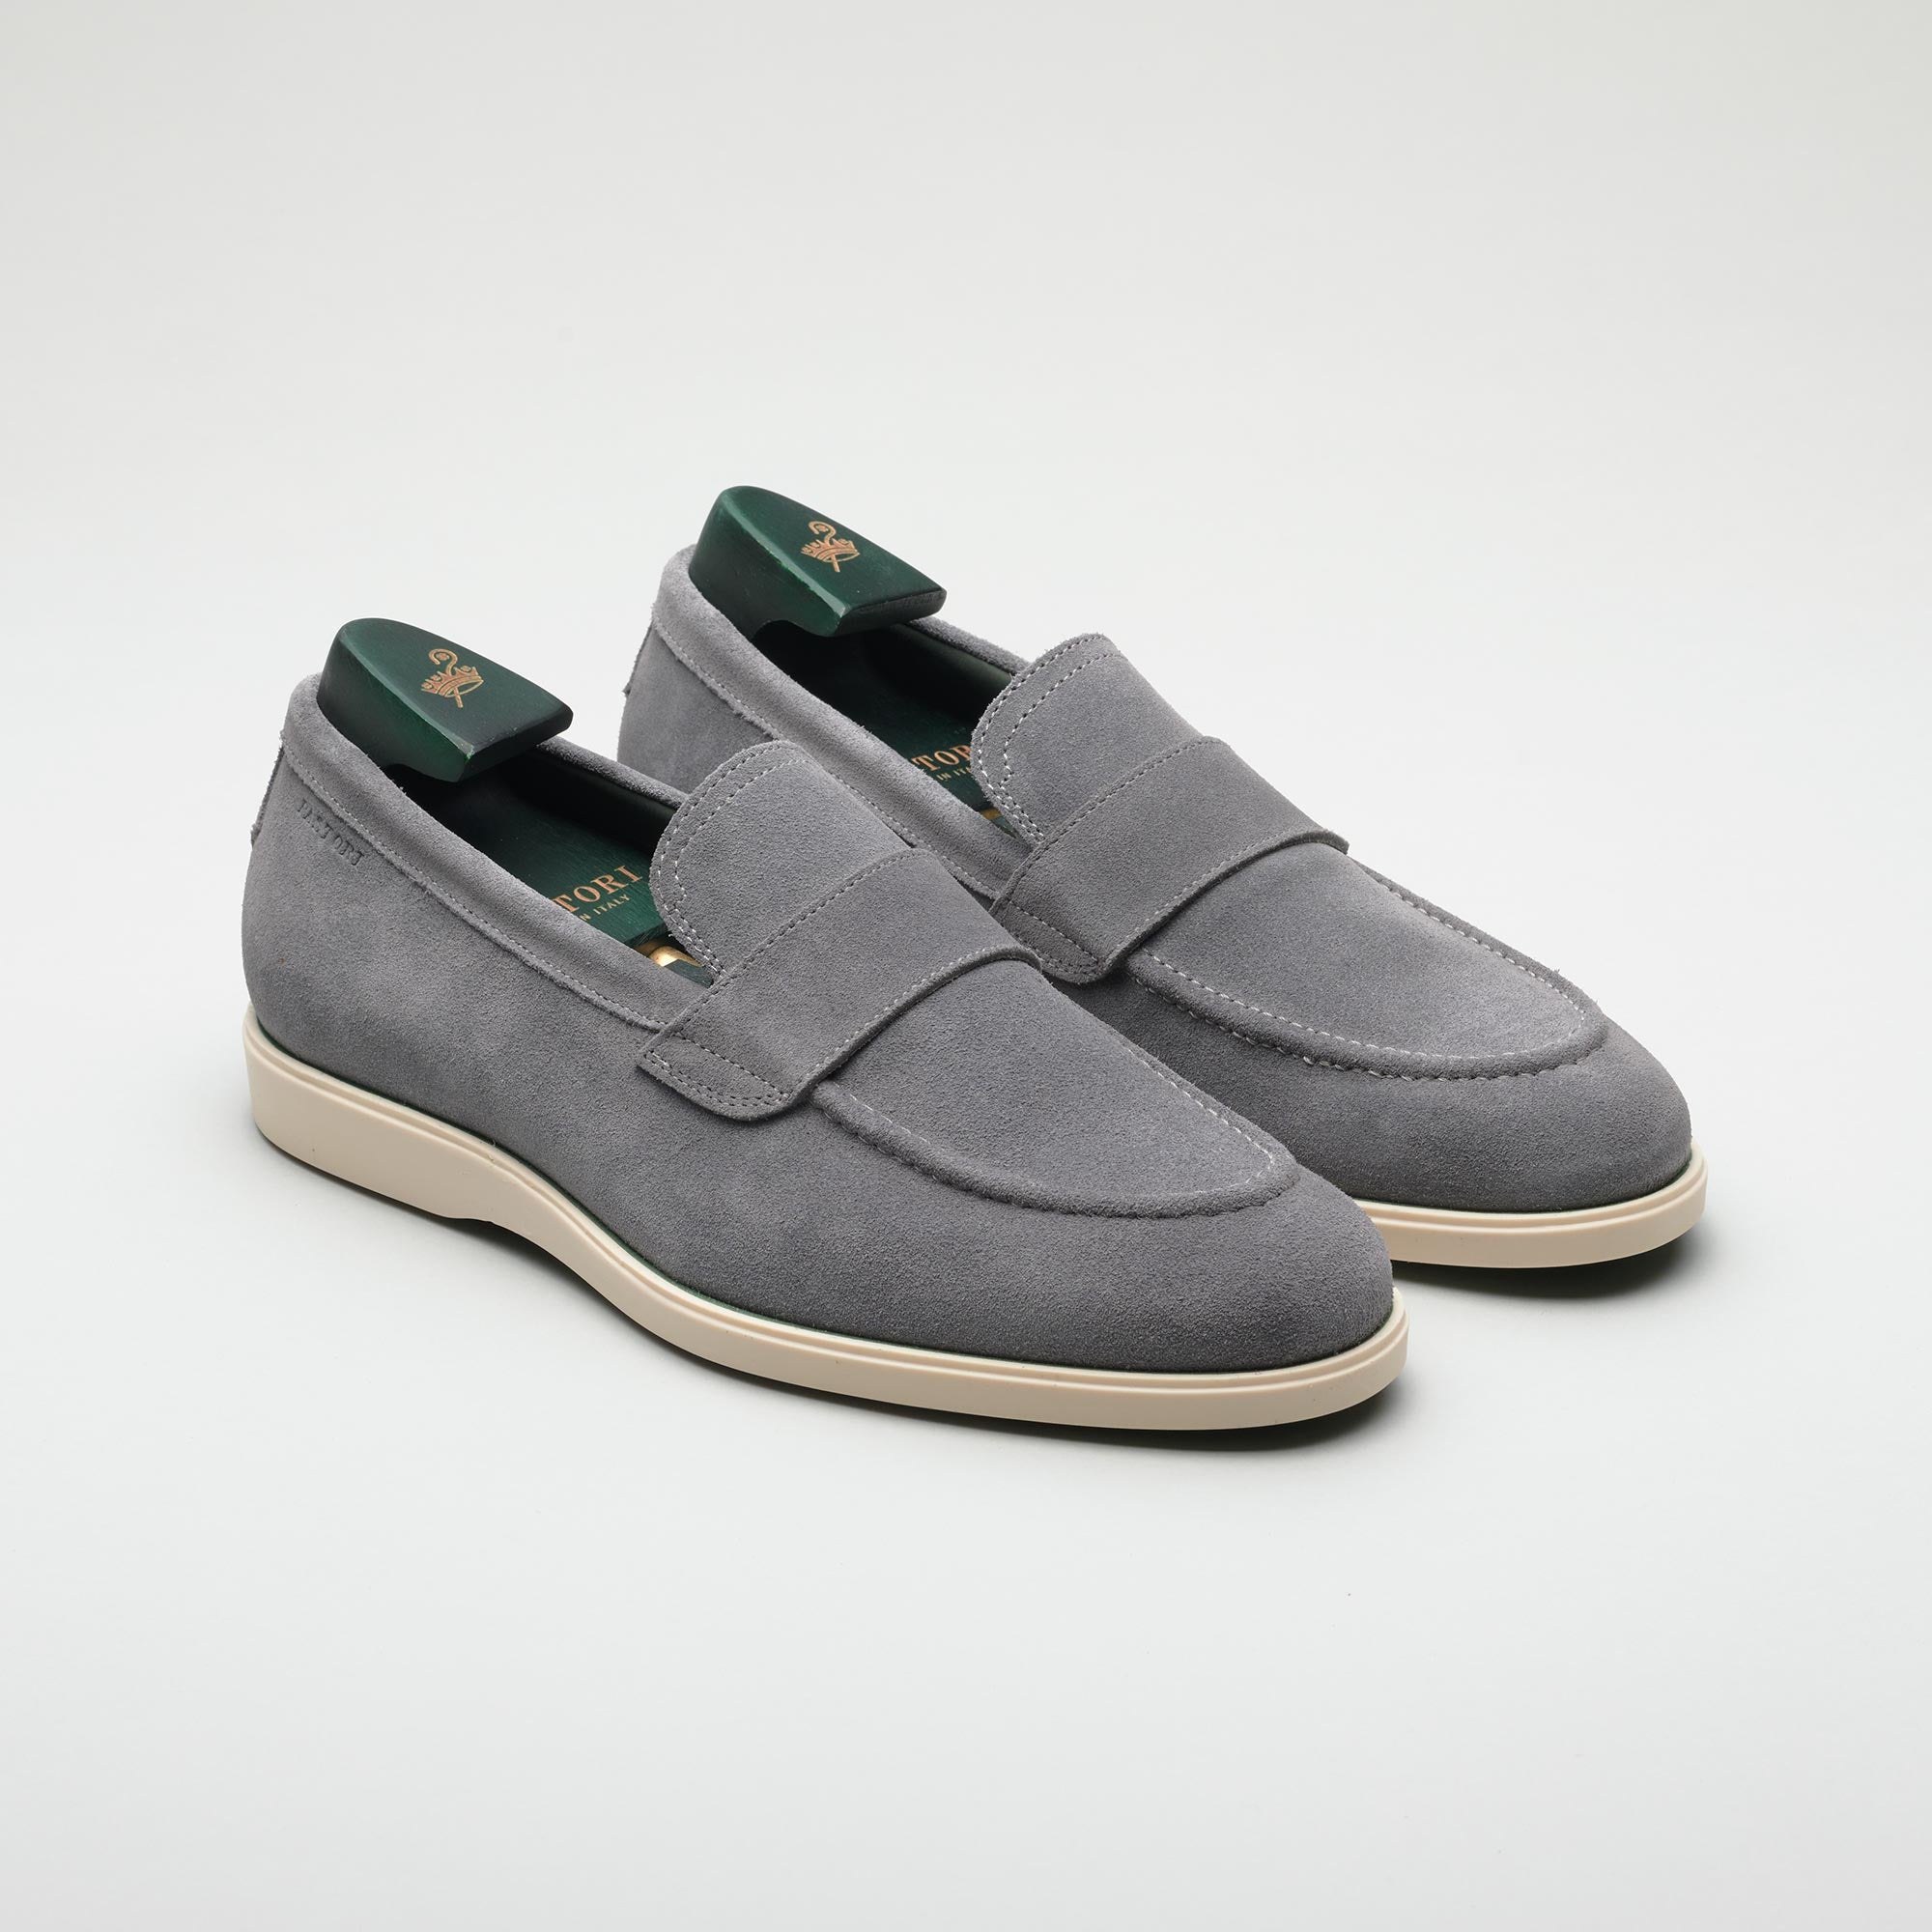 mens suede loafter sneaker suede grey, handmade, made in italy